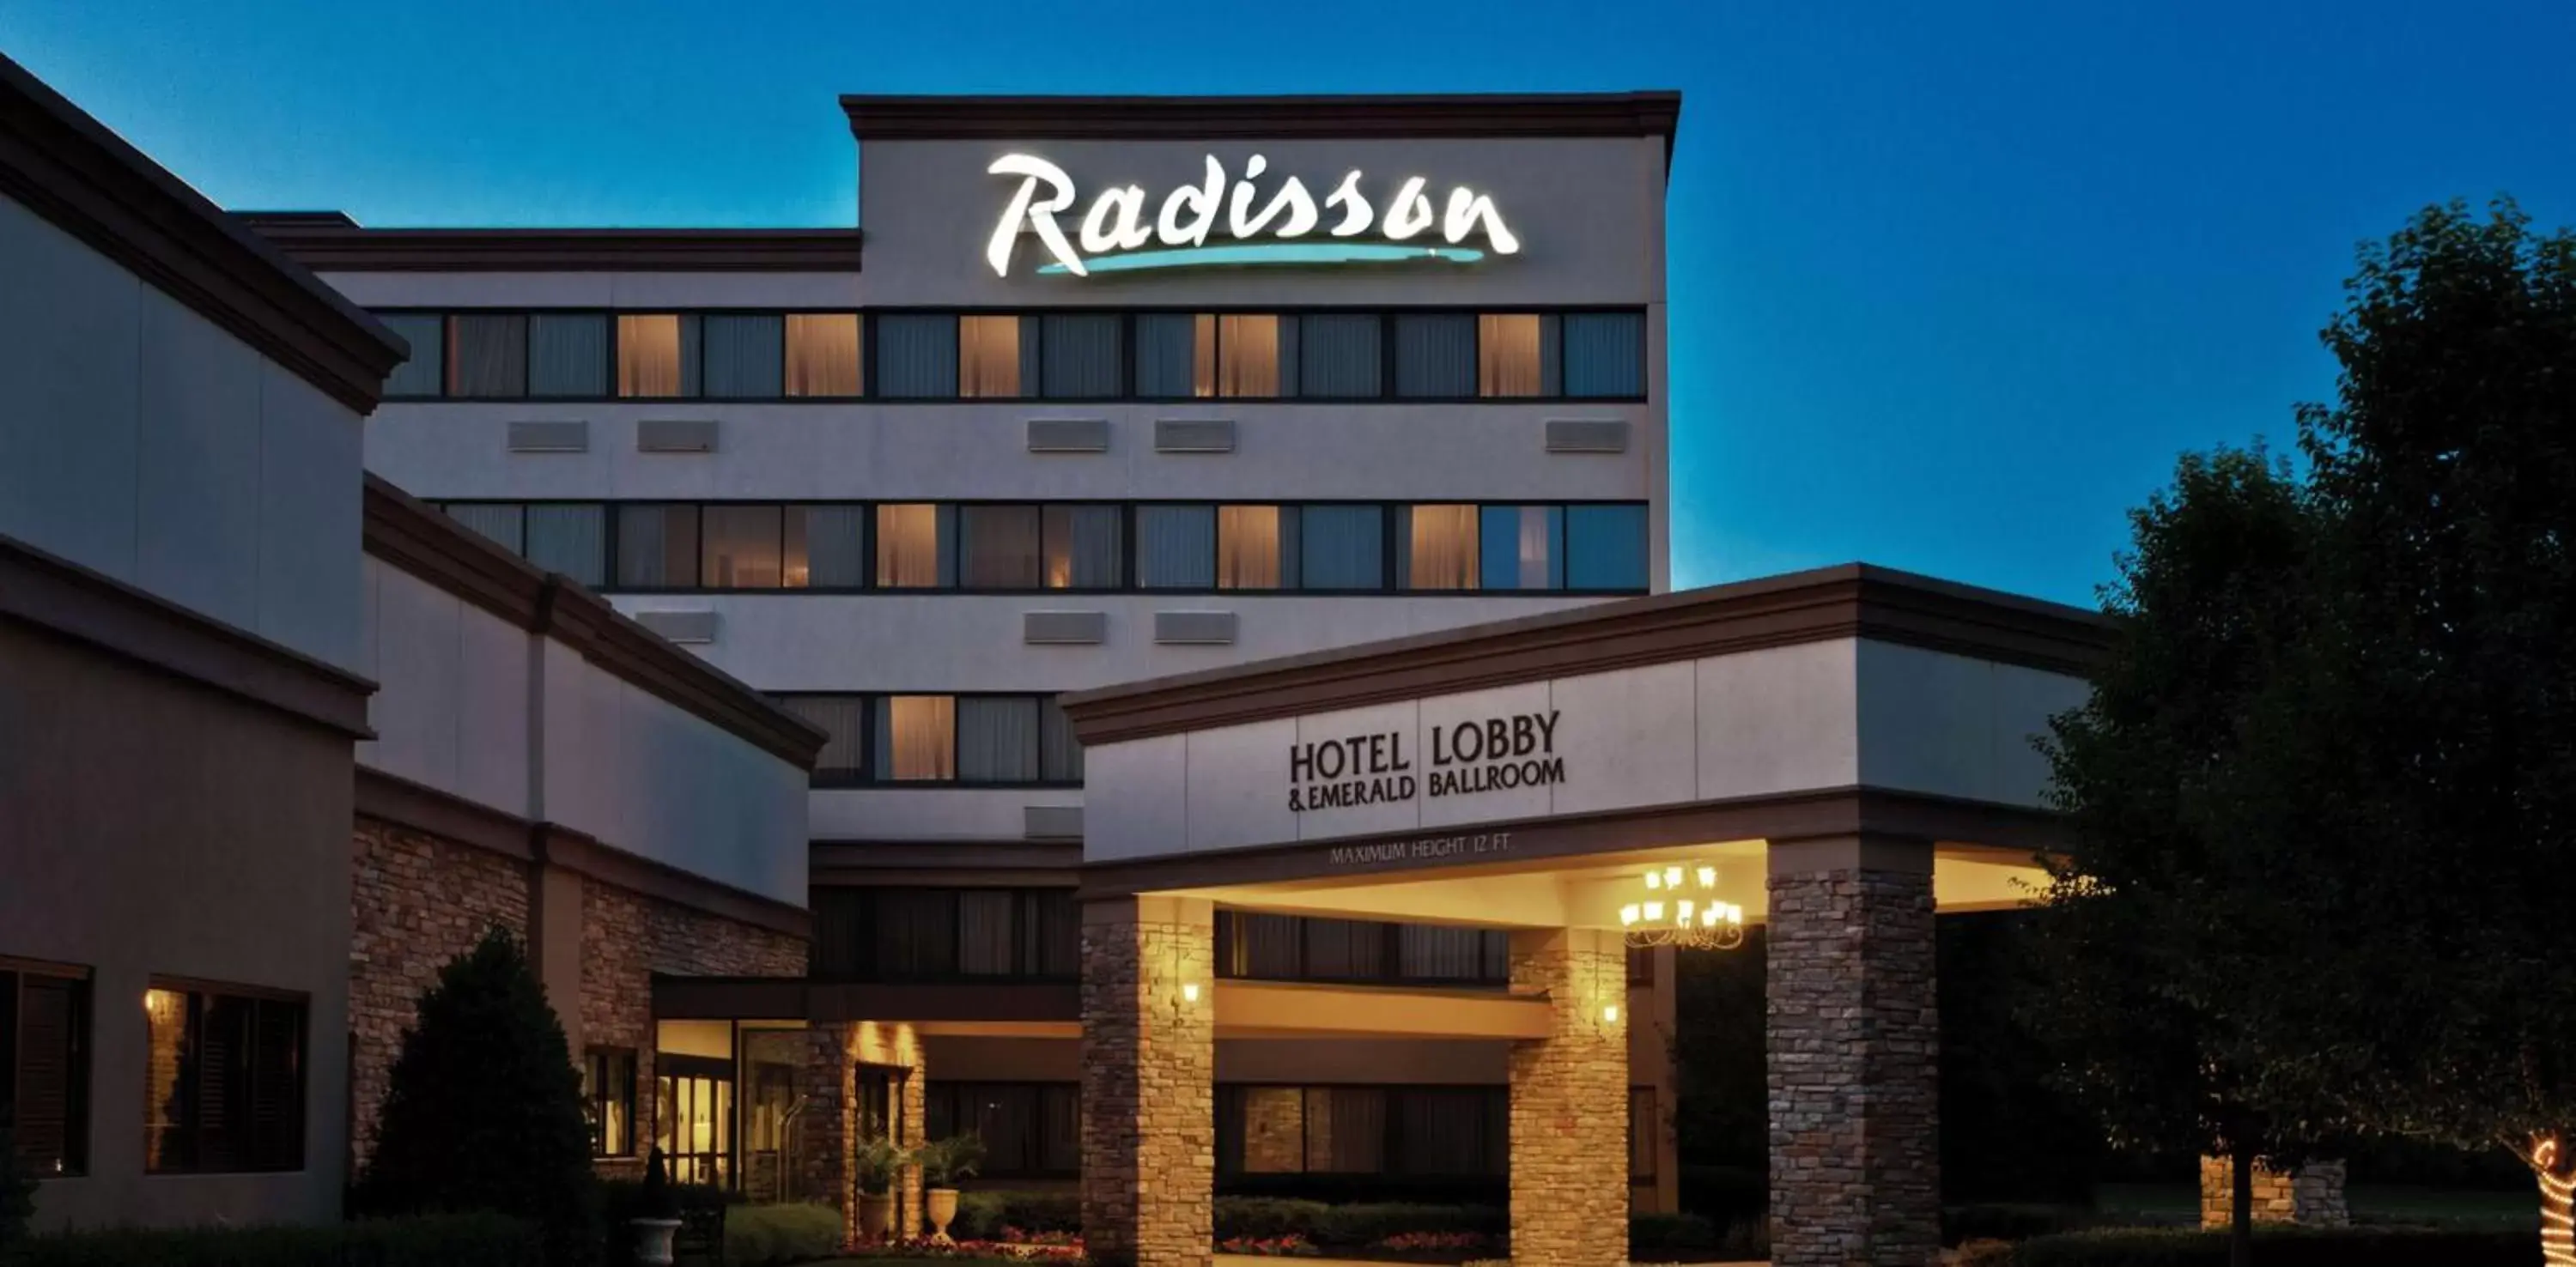 Property building in Radisson Freehold